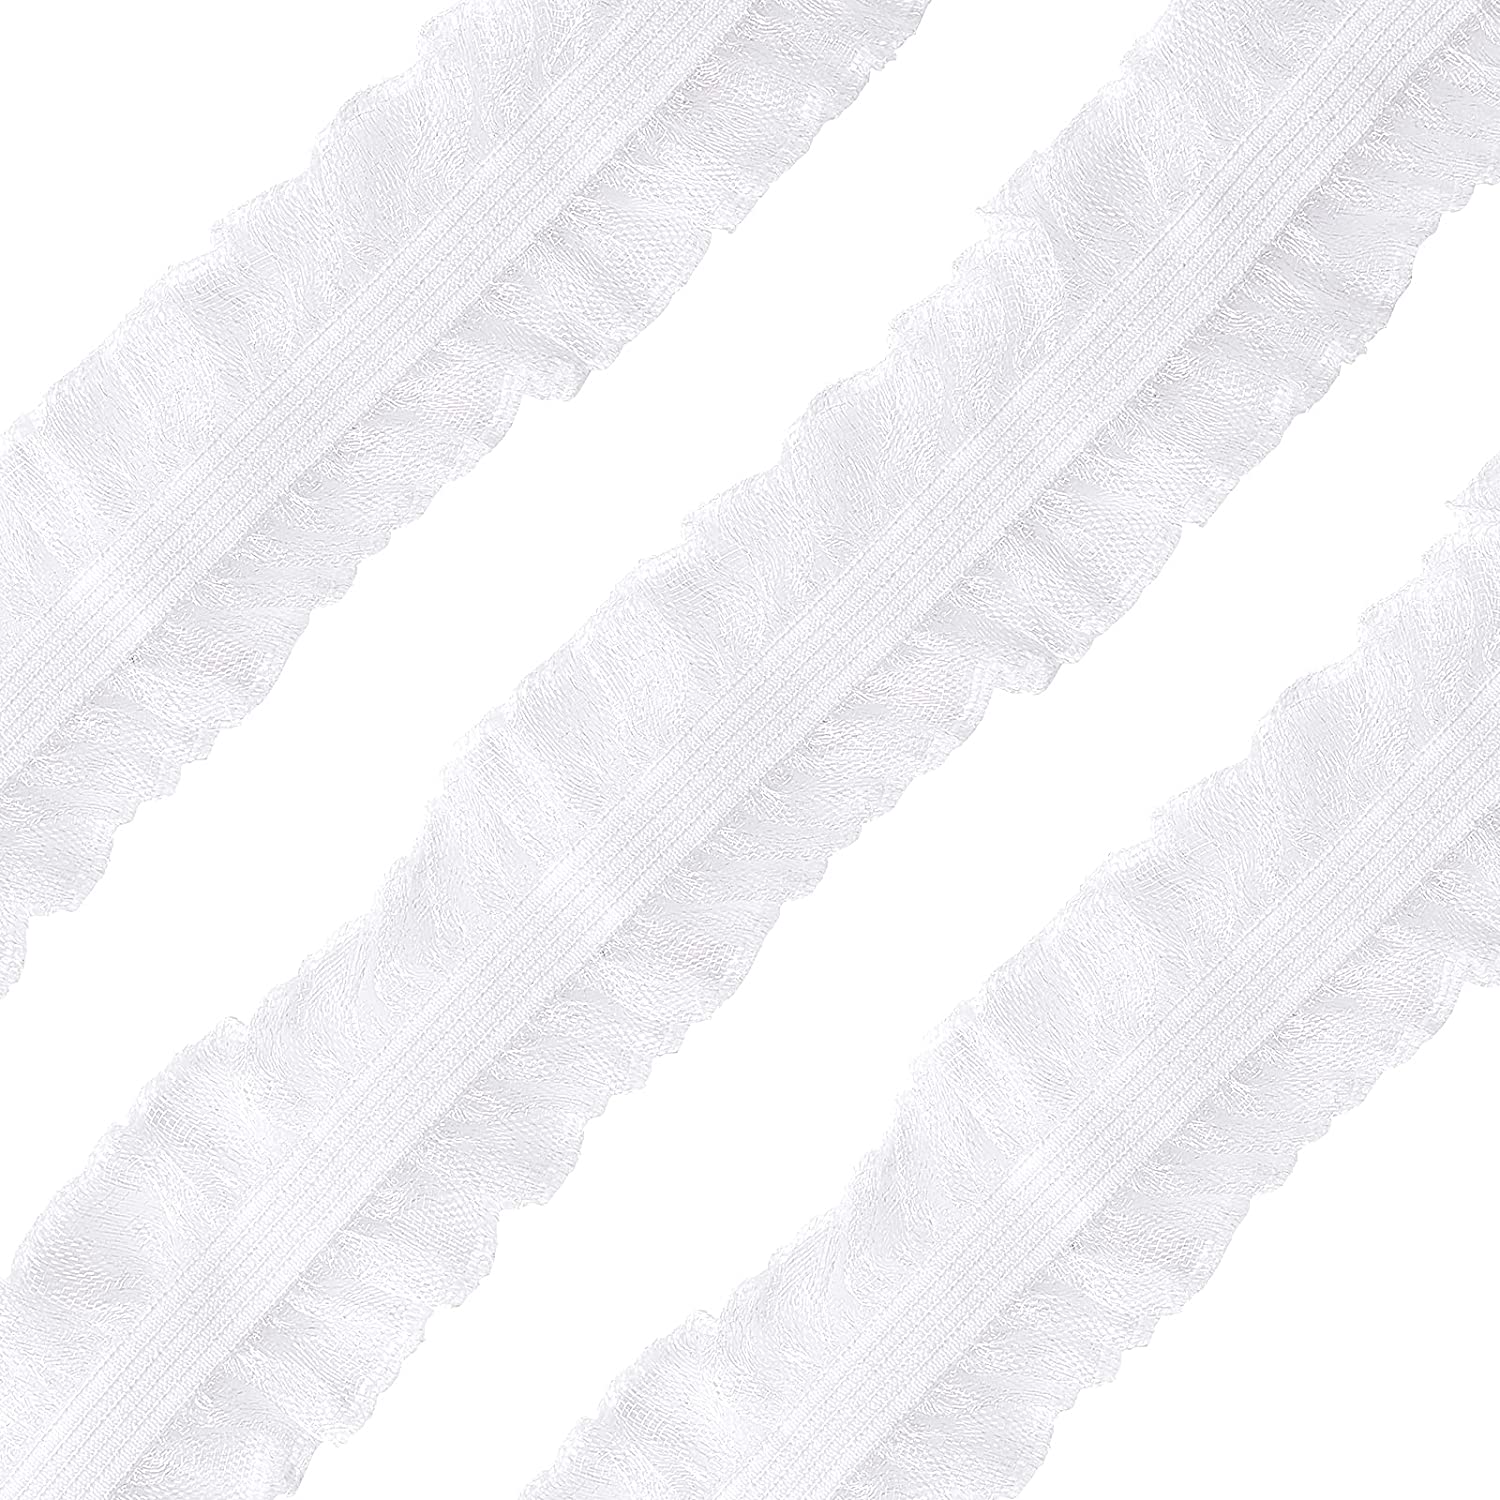 CRASPIRE 11Yard/10m White Fabric Lace Trim Stretch Elastic Double Ruffle Lace  Ribbon 1 inches/28mm Wide for Sewing, Dress Decoration and Gift Wrapping